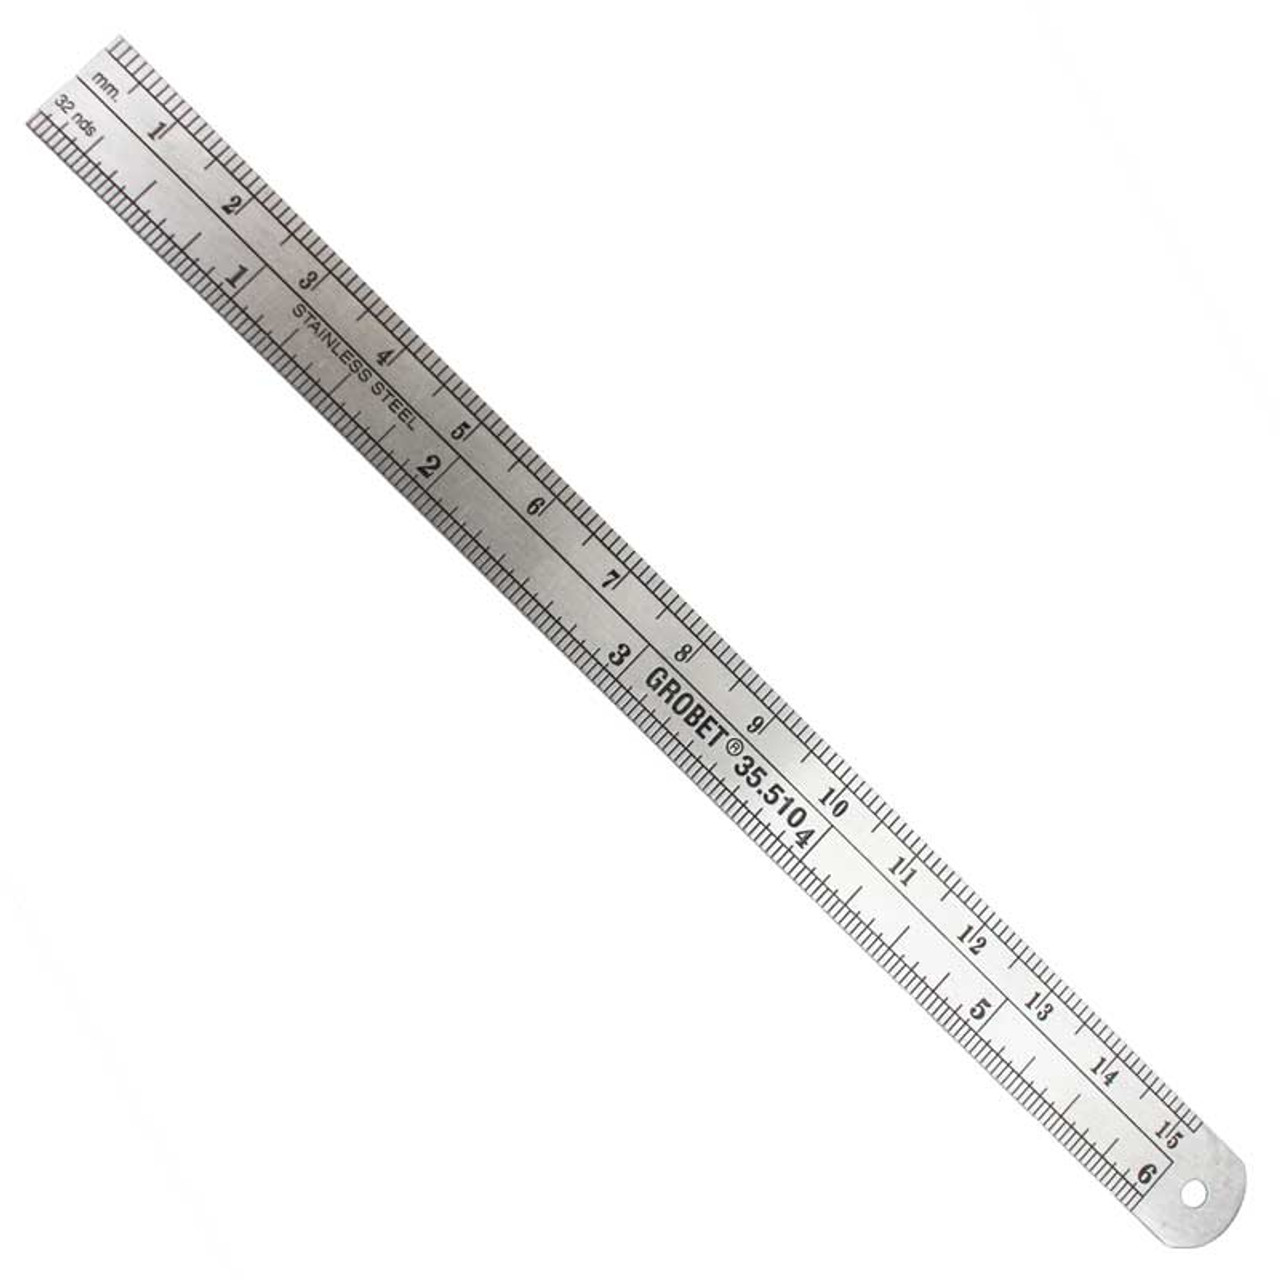 Plastic 7" inch Ruler with Millimeters and Inches mm in Metal Gauge Ruler